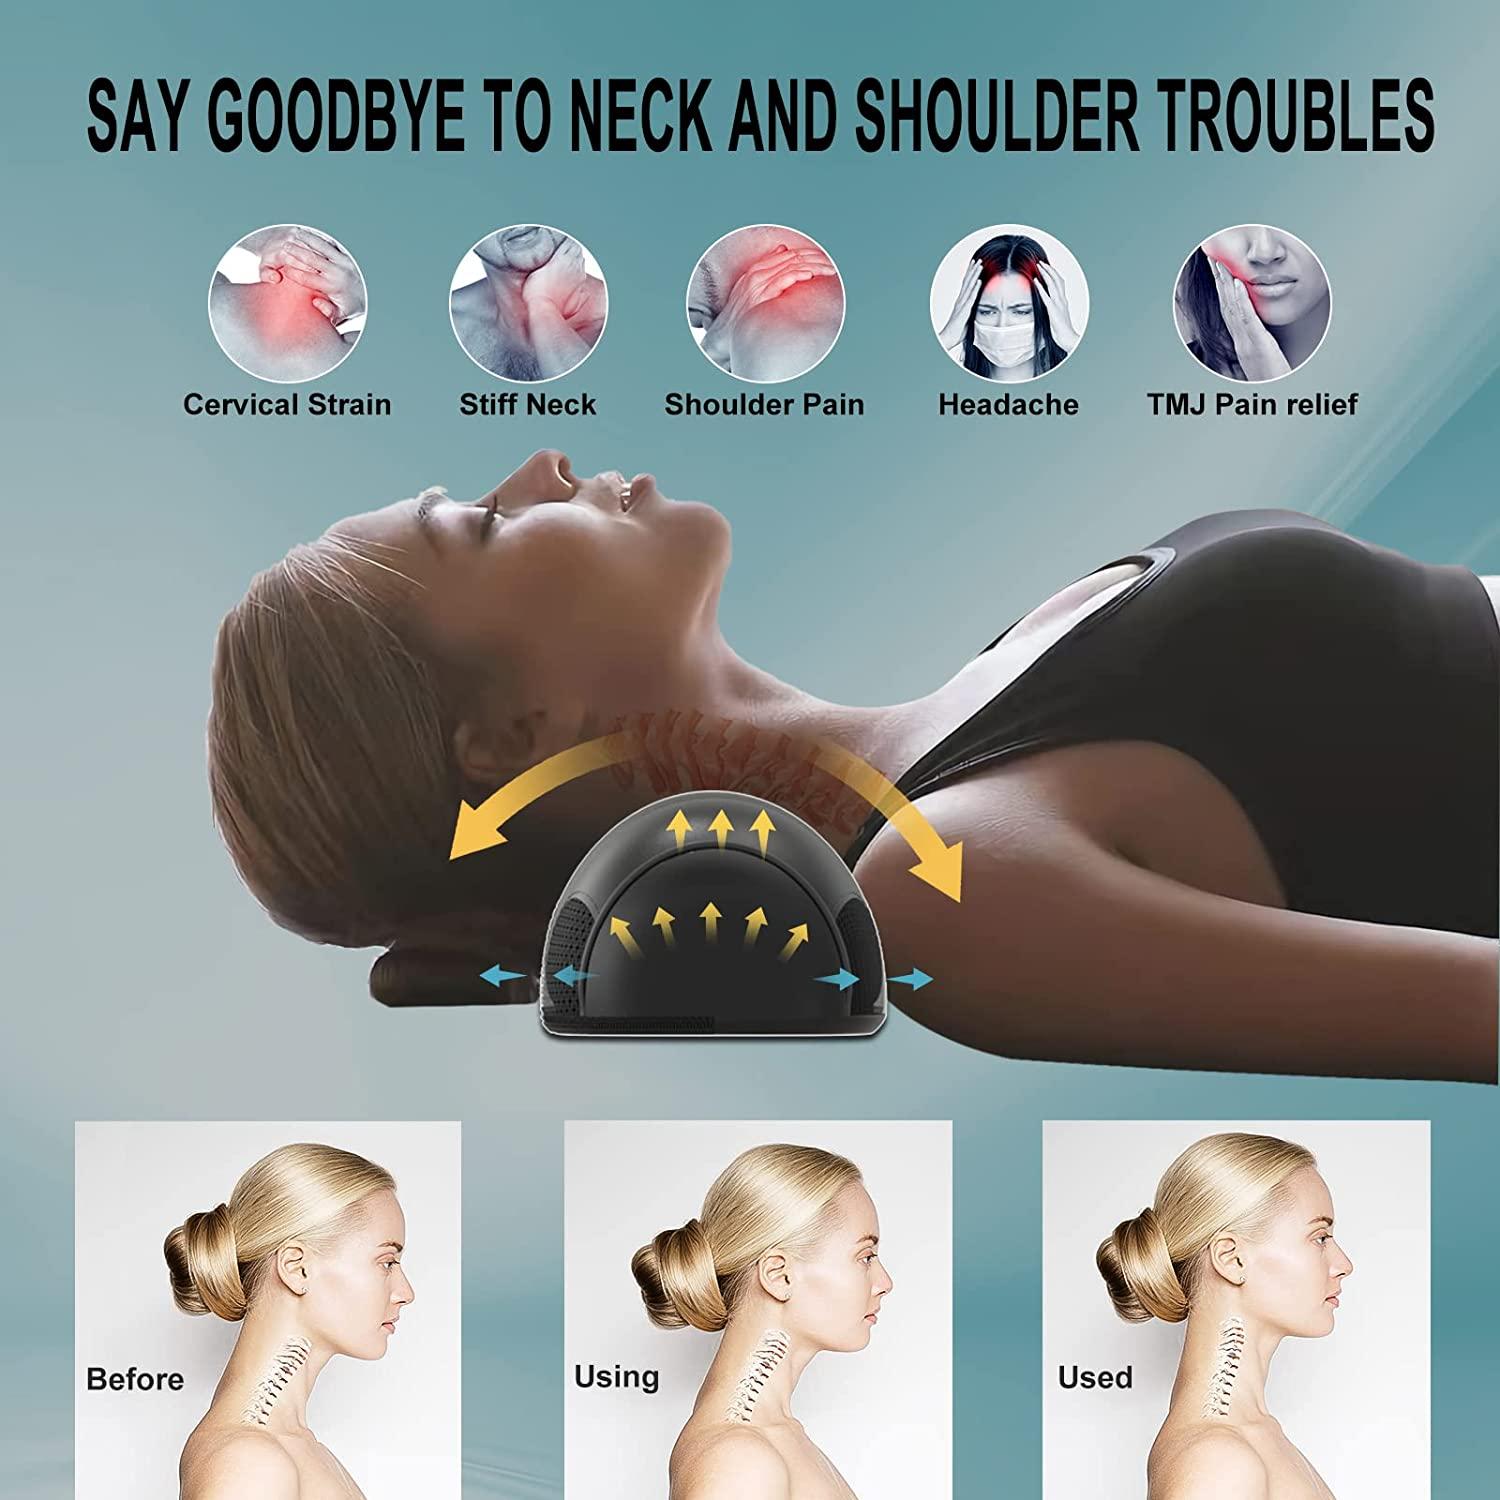 Say Goodbye to Neck Pain with 20% Off This Famedio Heated Neck Stretcher!